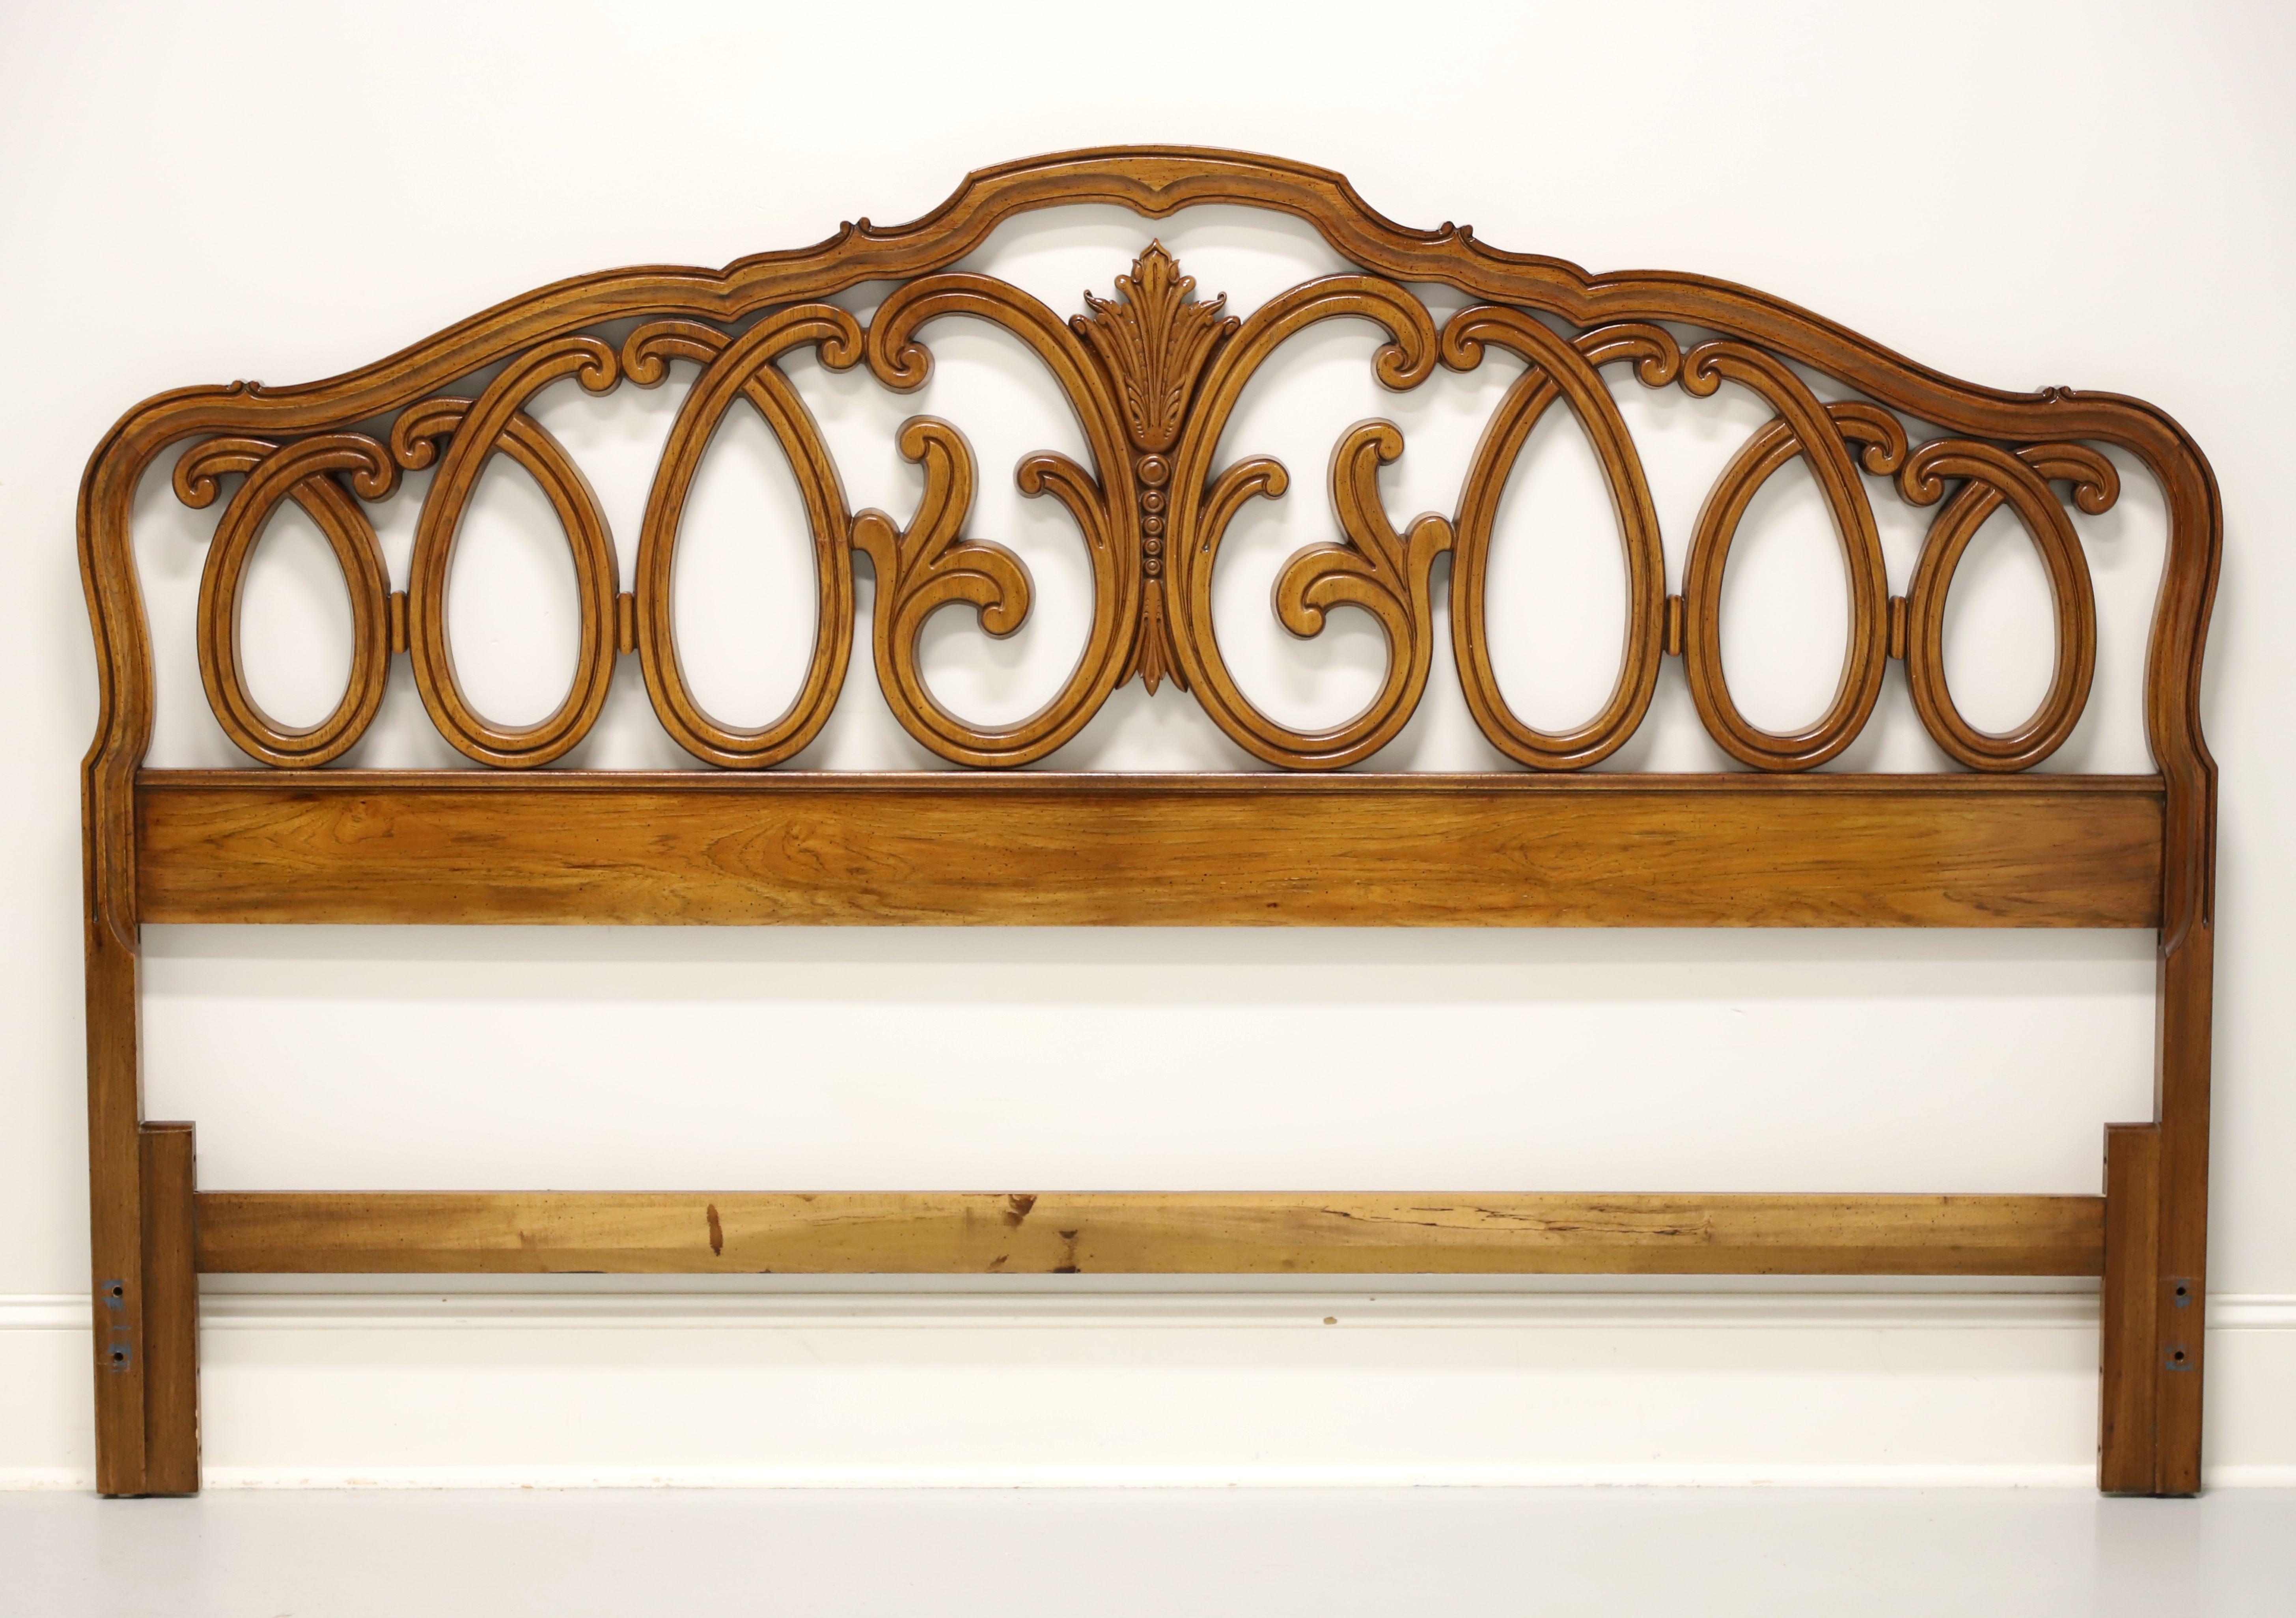 Nutwood THOMASVILLE Pecan French Country King Size Headboard